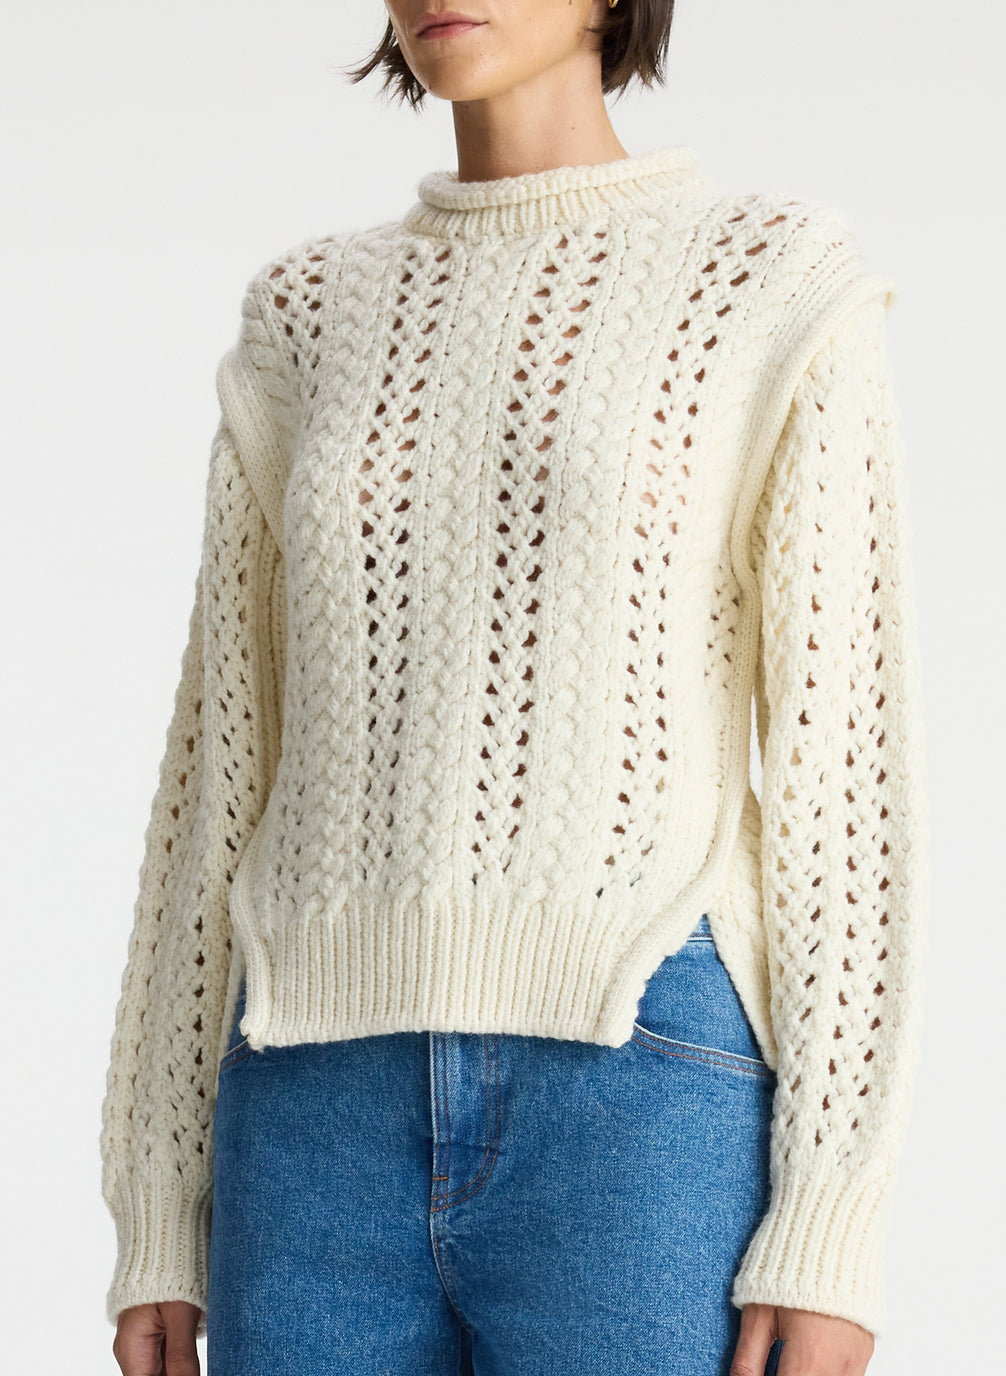 detail view of woman wearing cream open knit sweater and medium wash denim jeans